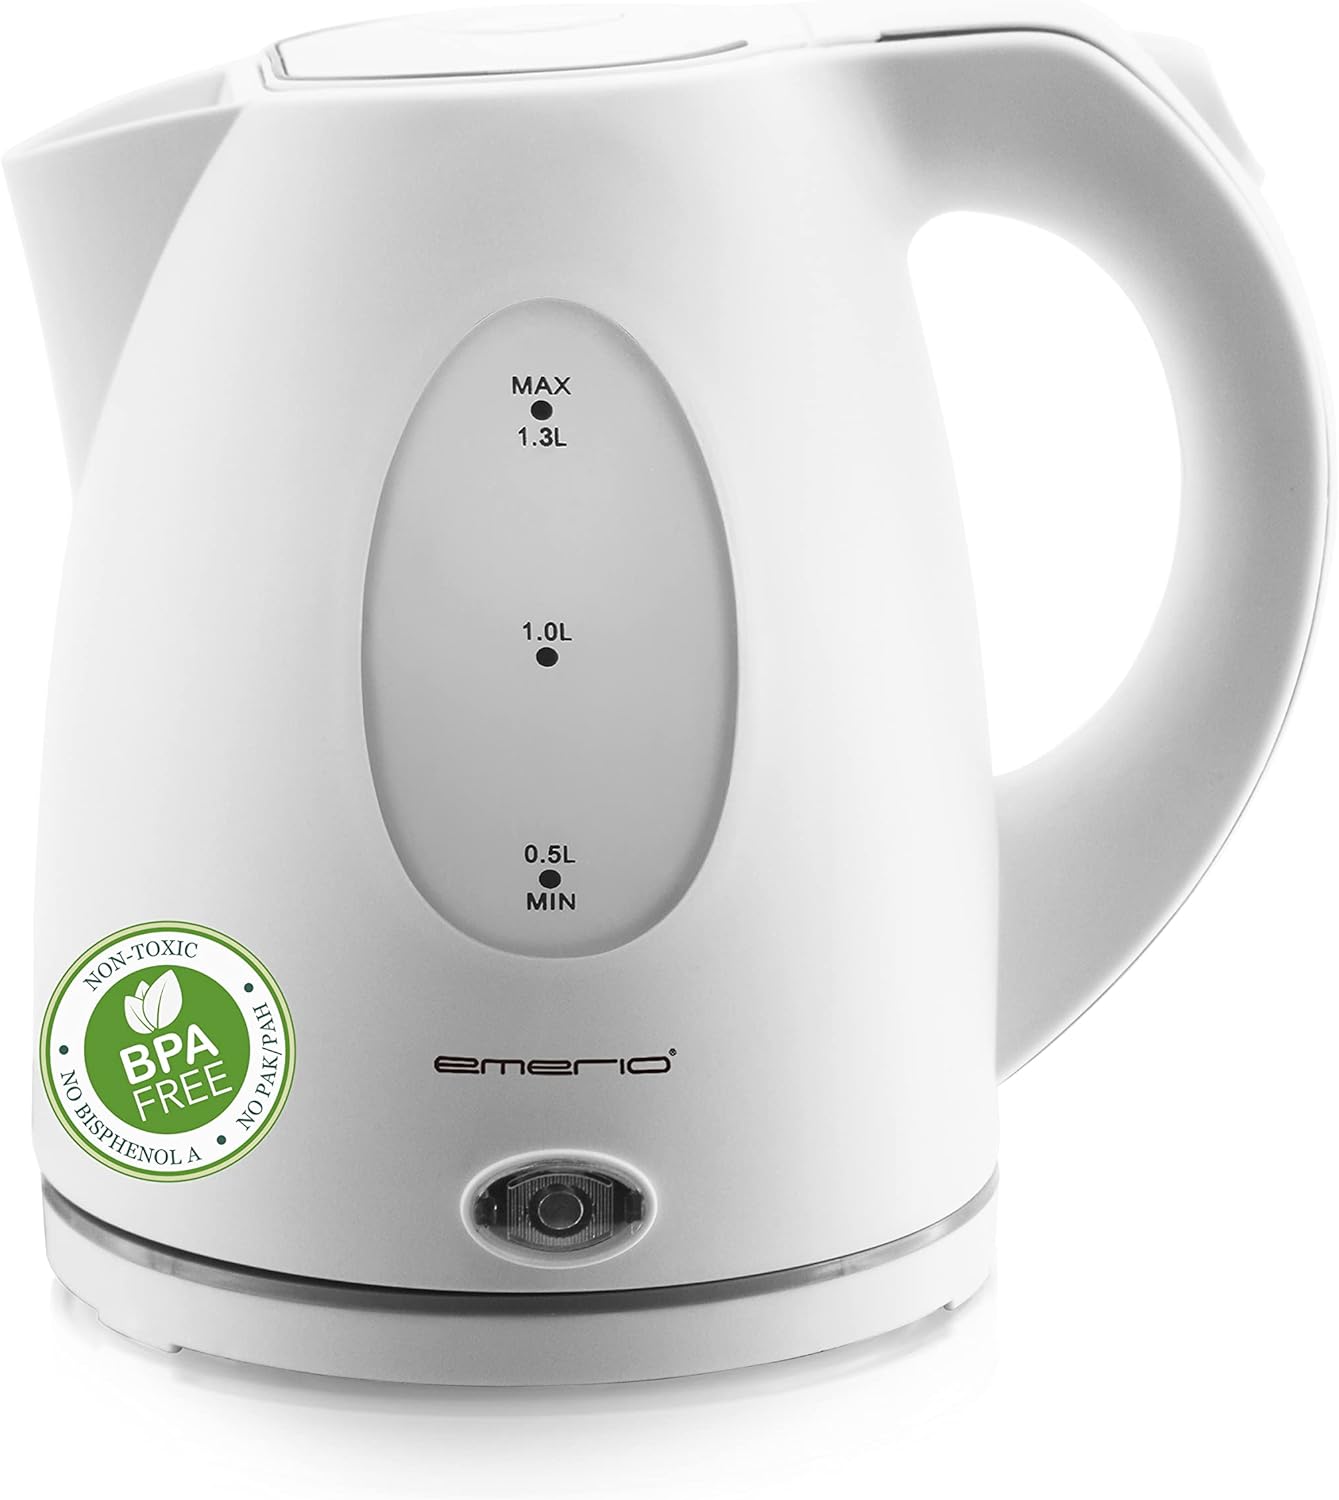 Emerio WK-106468.13 Kettle 1.3 Litre for Travel/Camping/Office with 2200 Watt, BPA-Free, Automatic Shut-Off with Dry Protection, 360° Base, Includes Limescale Filter, White